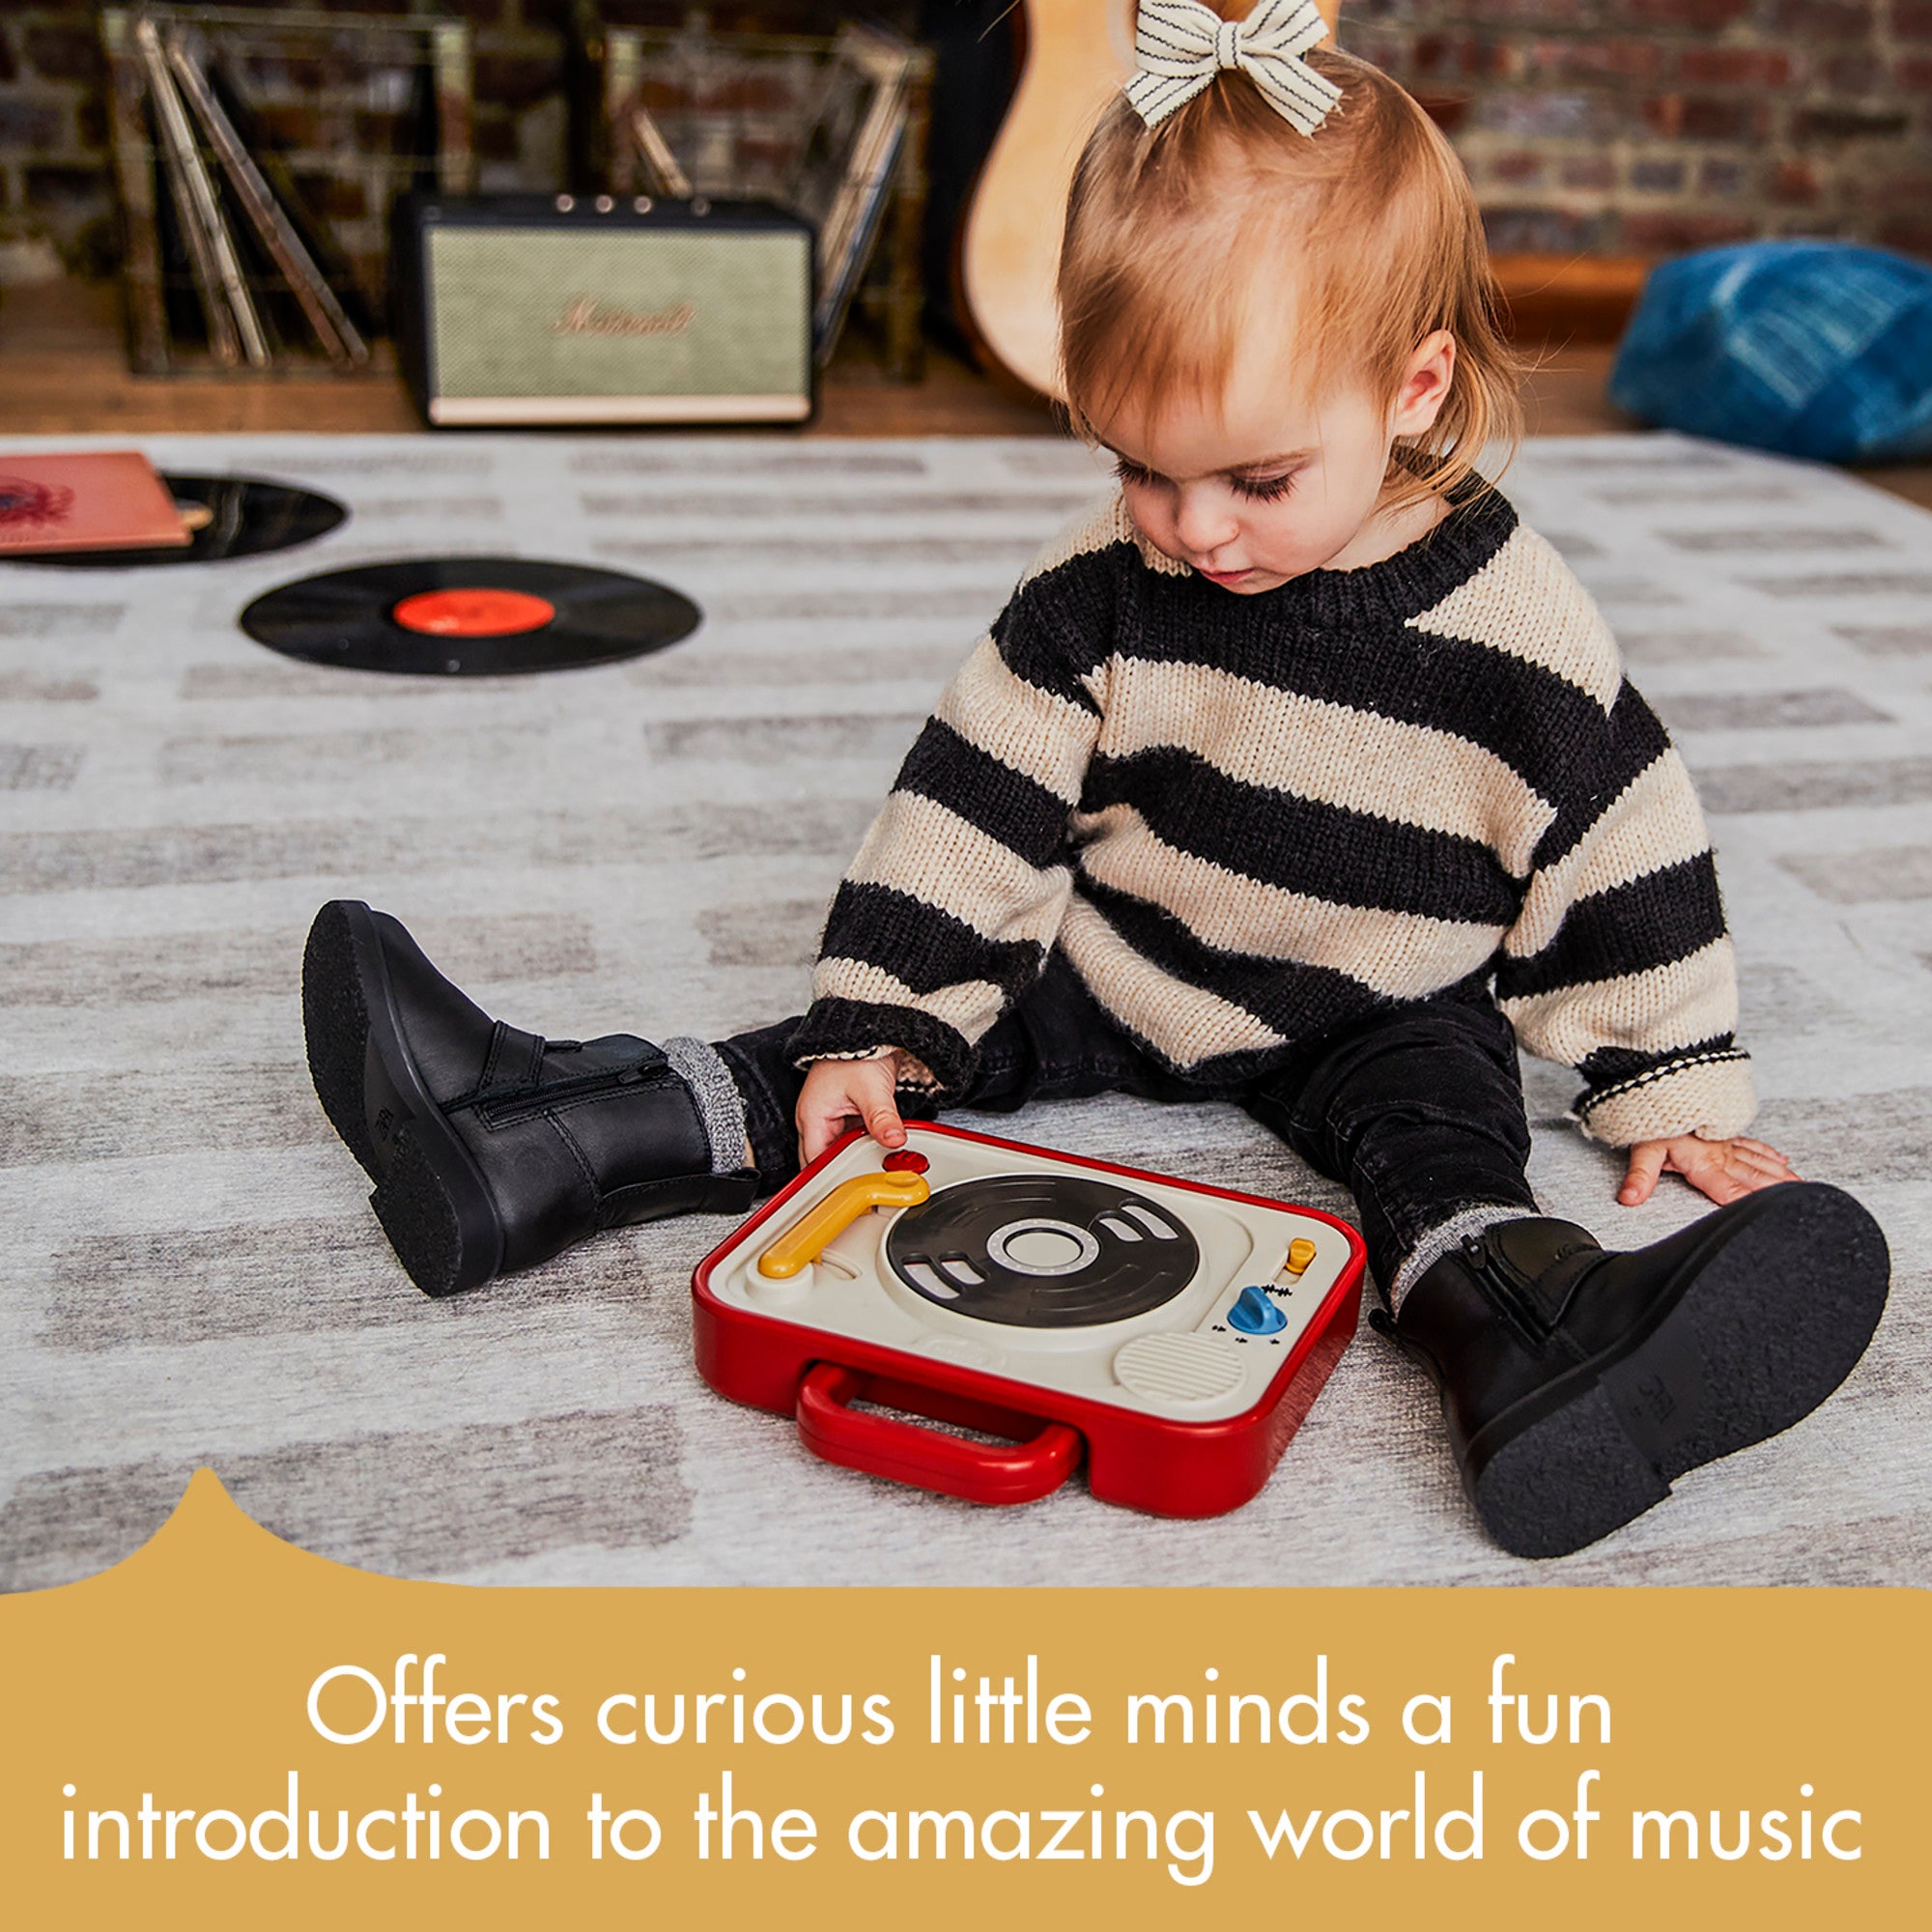 Tiny Rockers DJ Station - Play fun tunes and rock with your favorite dance partner!